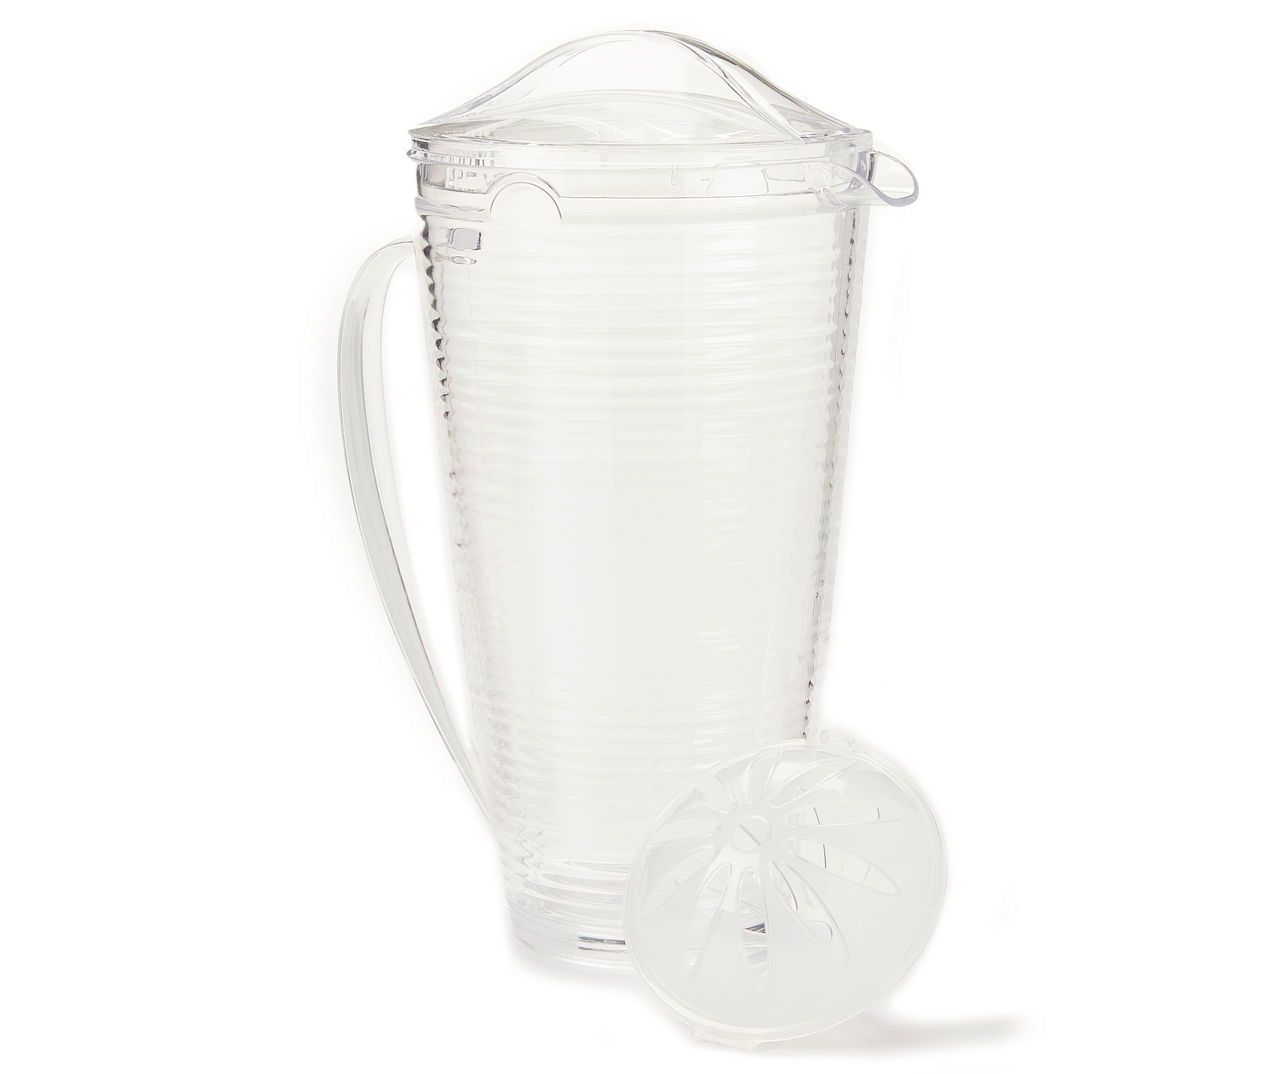 Clear Acrylic 2-Quart Pitcher With Lid & Flavor Infuser